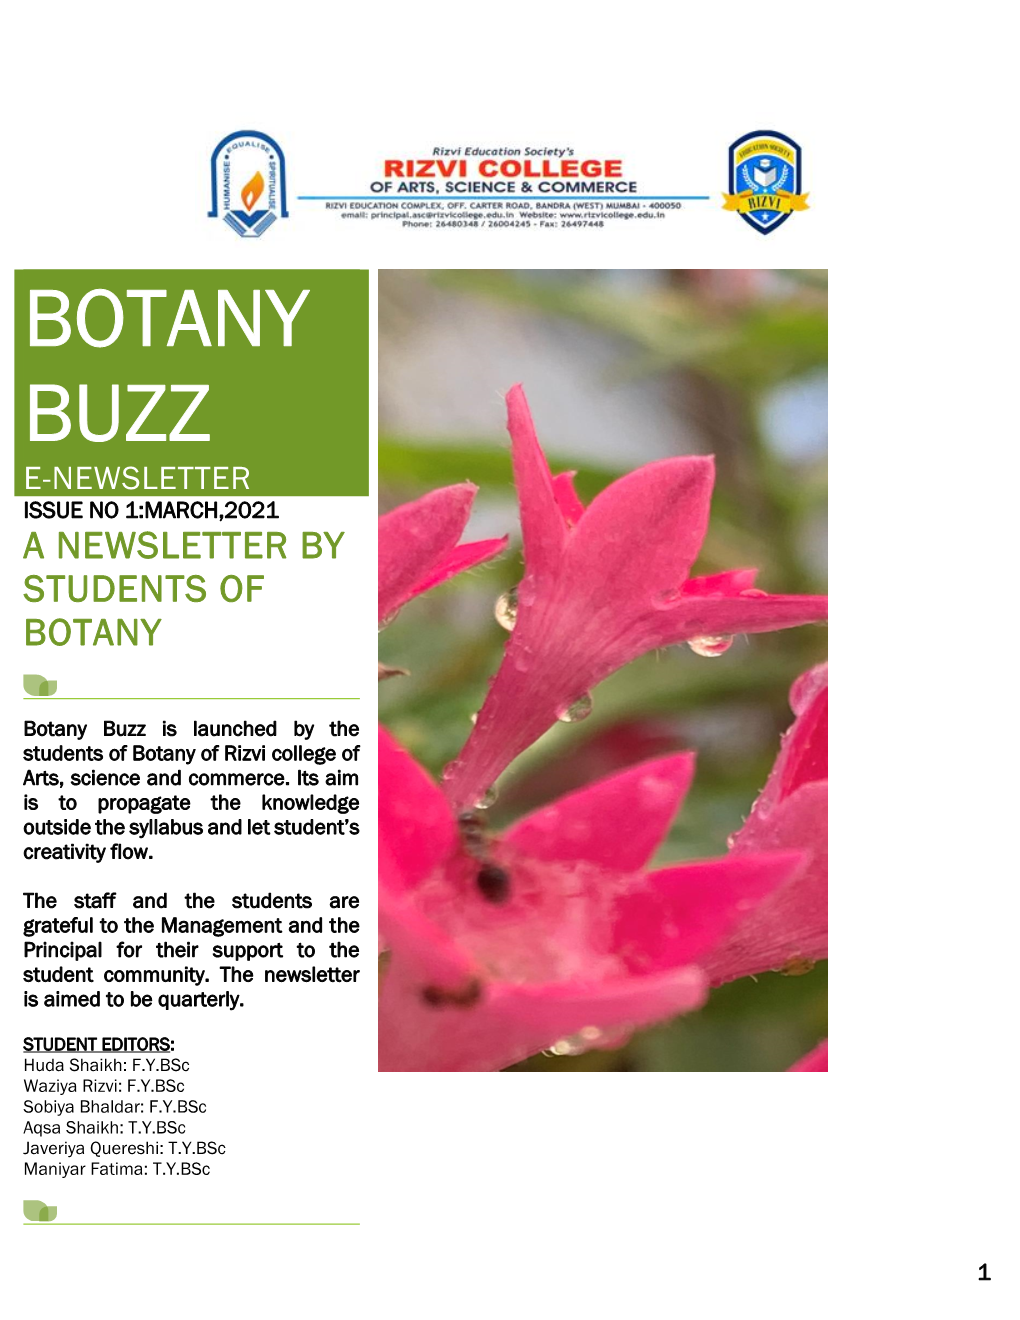 Botany Buzz E-Newsletter Issue No 1:March,2021 a Newsletter by Students of Botany